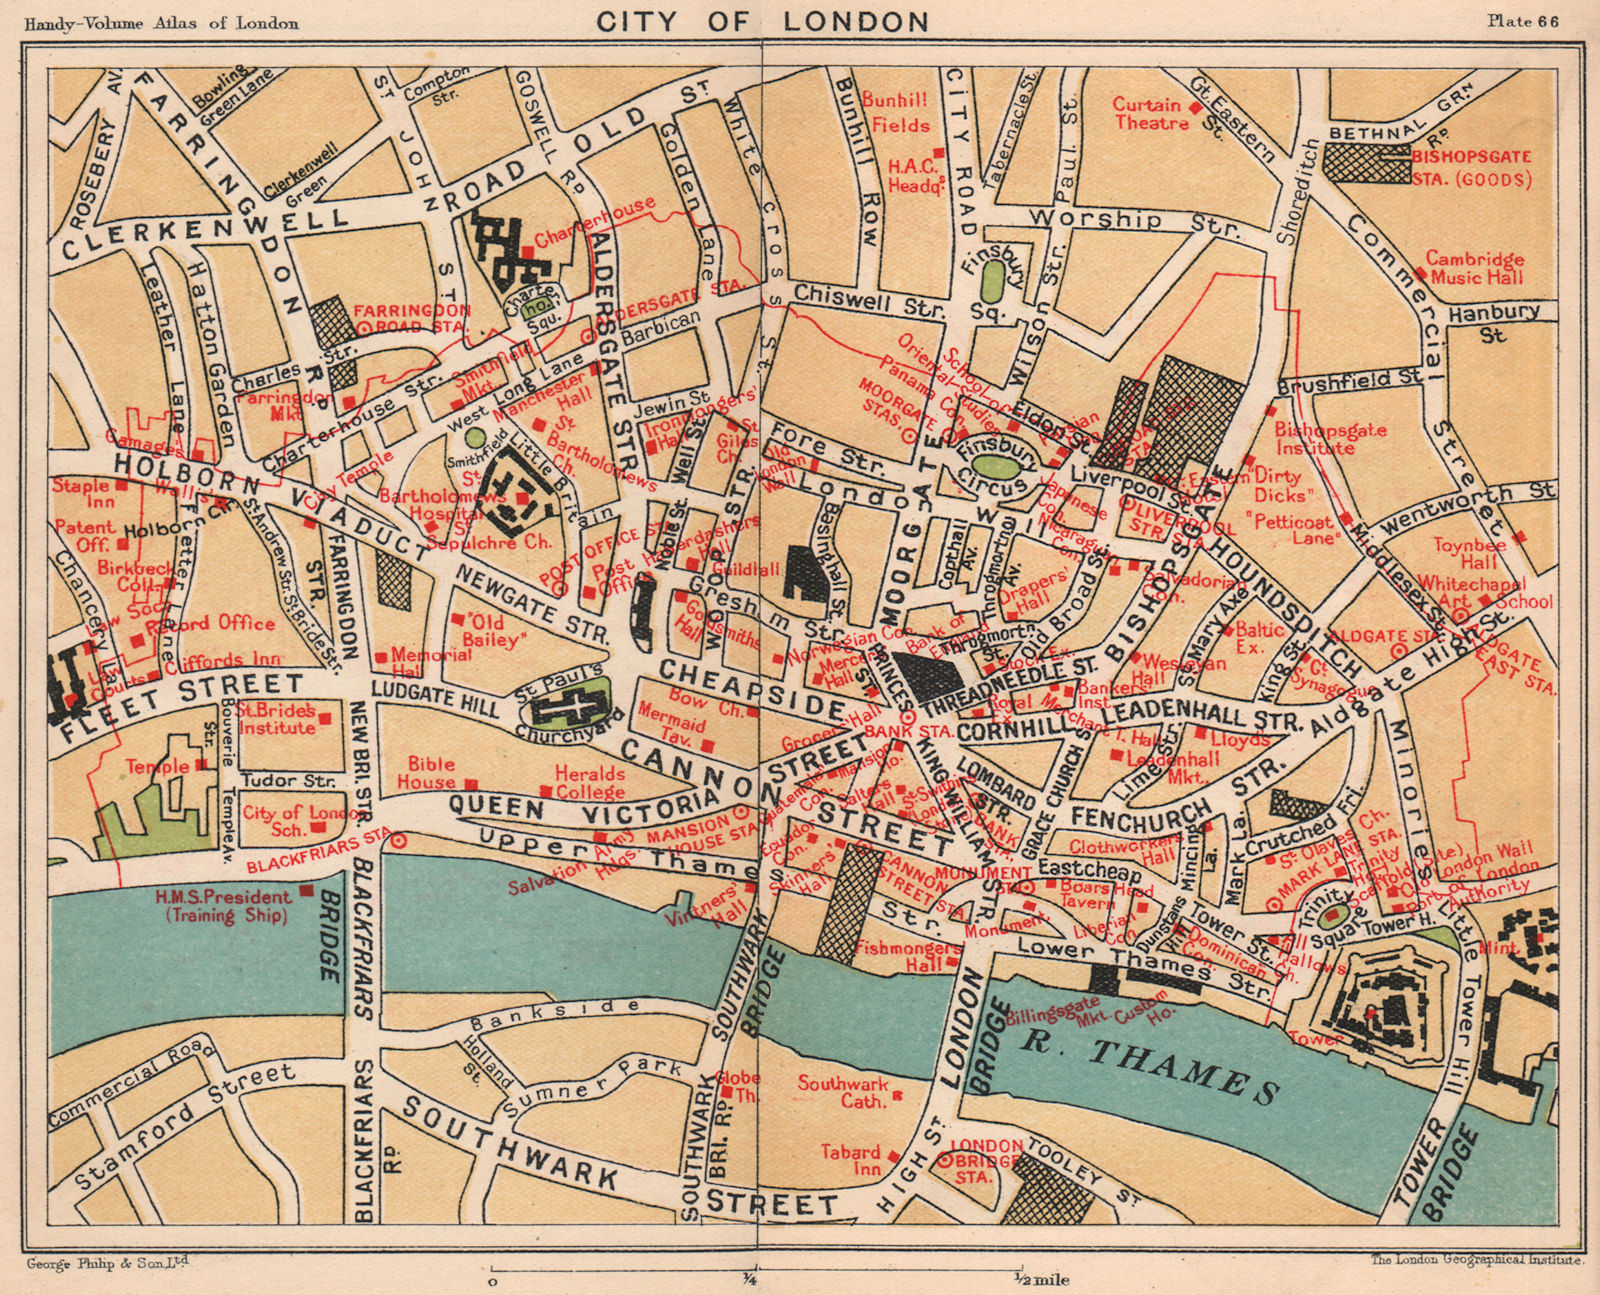 CITY OF LONDON. Public buildings Livery companies Exchanges Embassies 1932 map